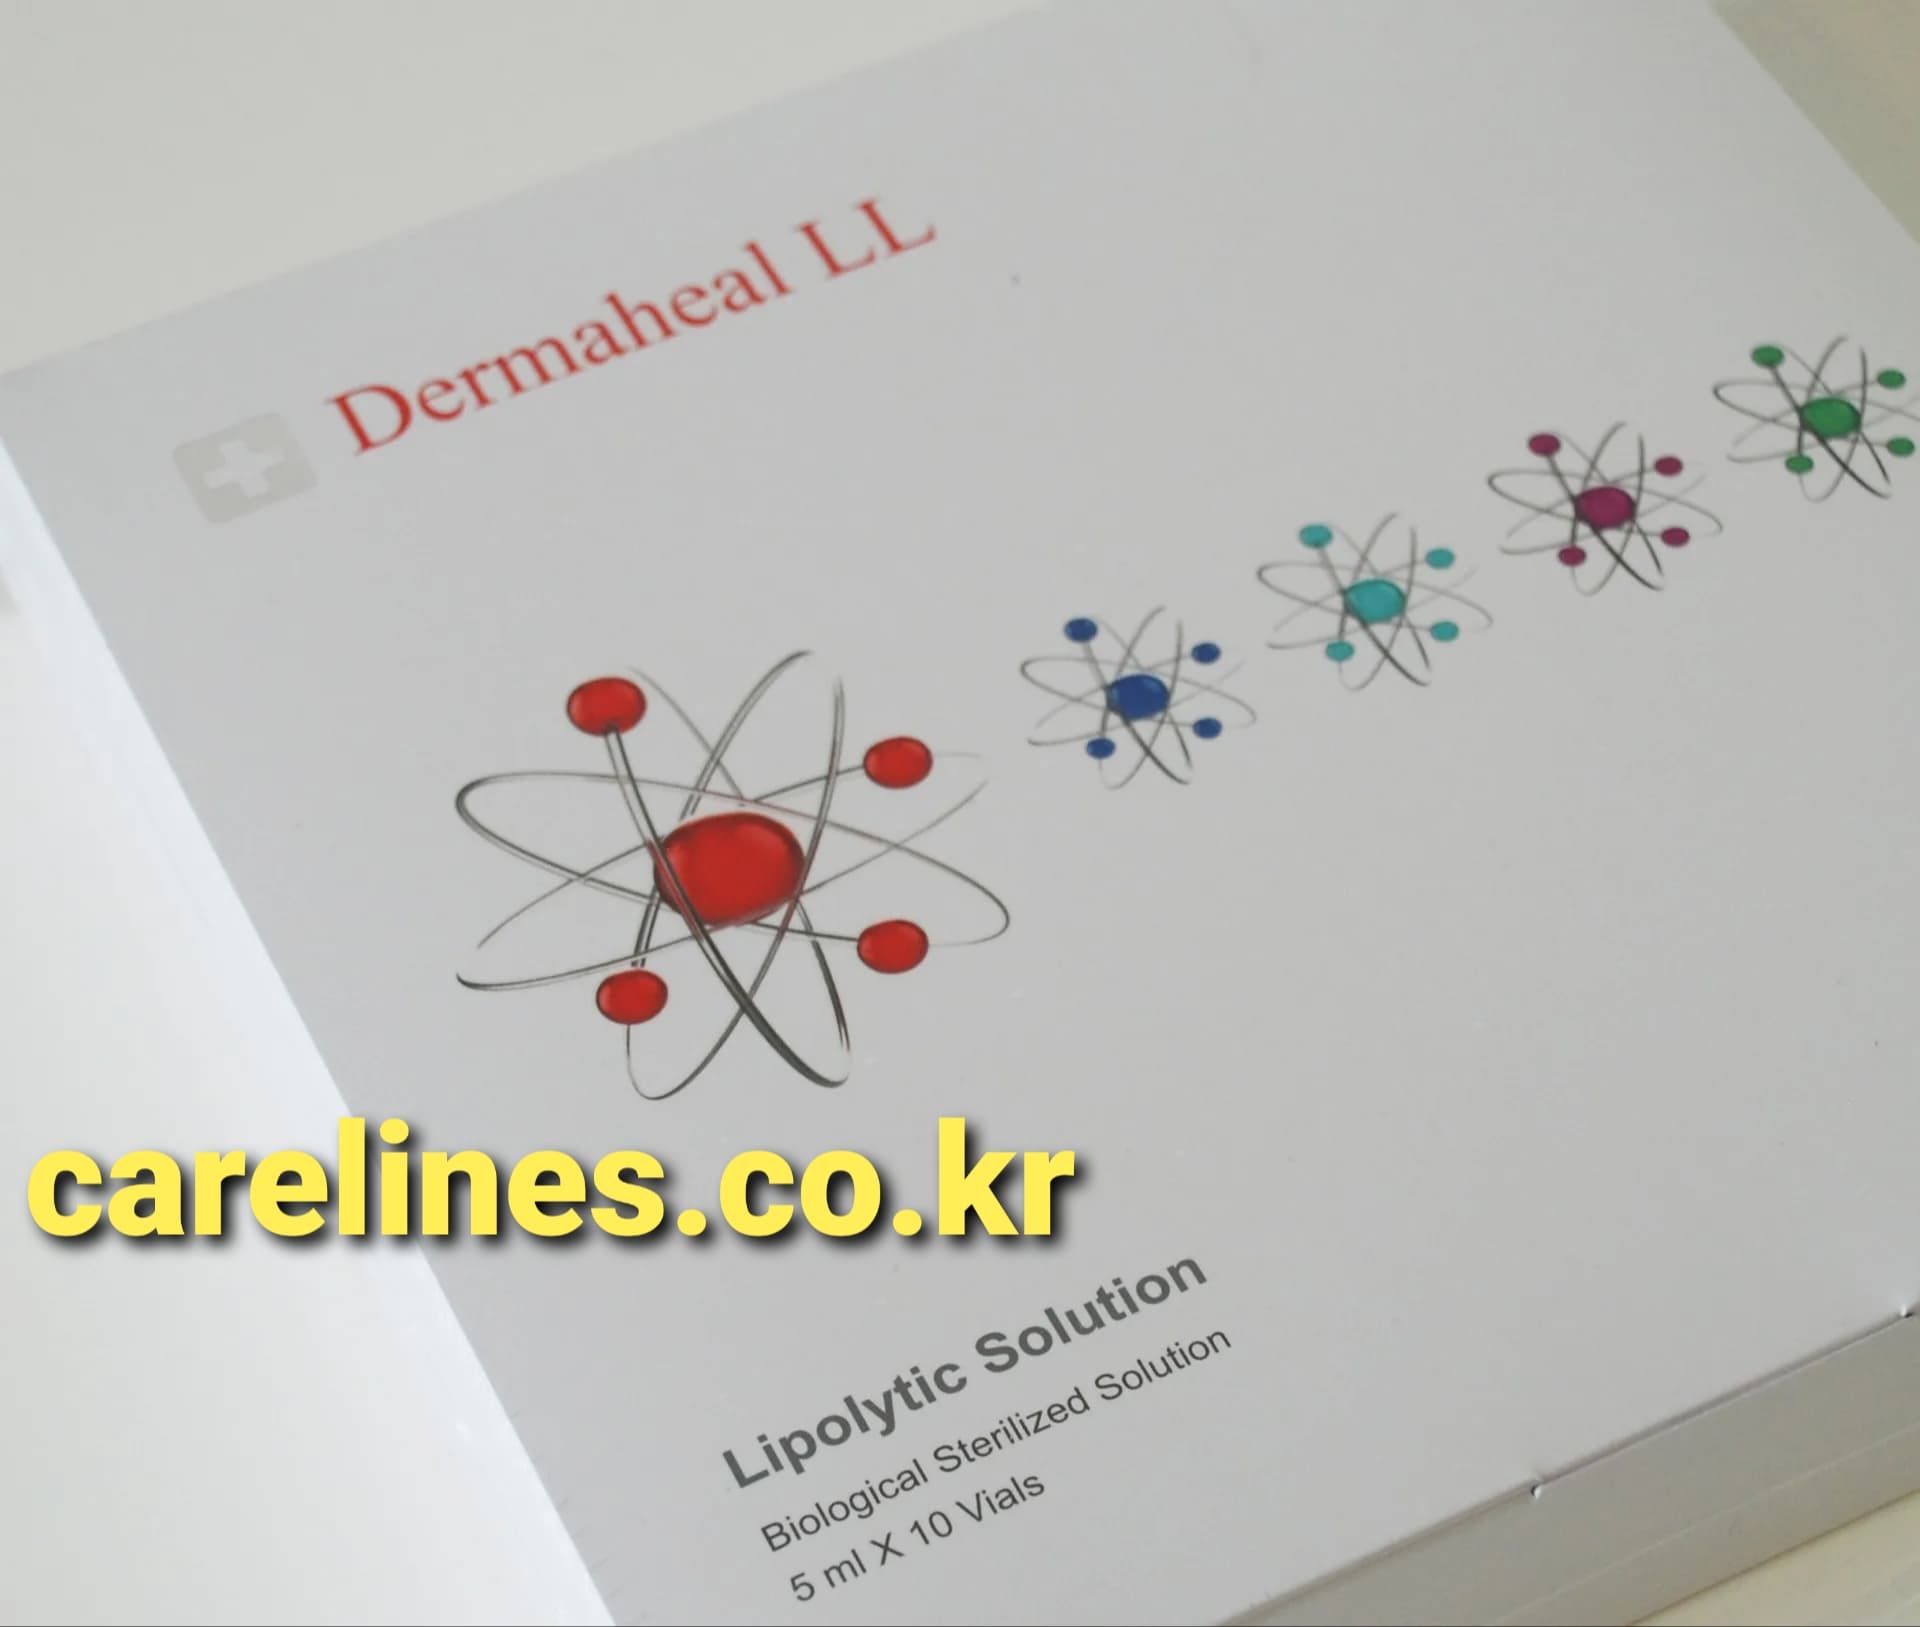 Dermaheal LL _ Lipolytic Solution _ with CE